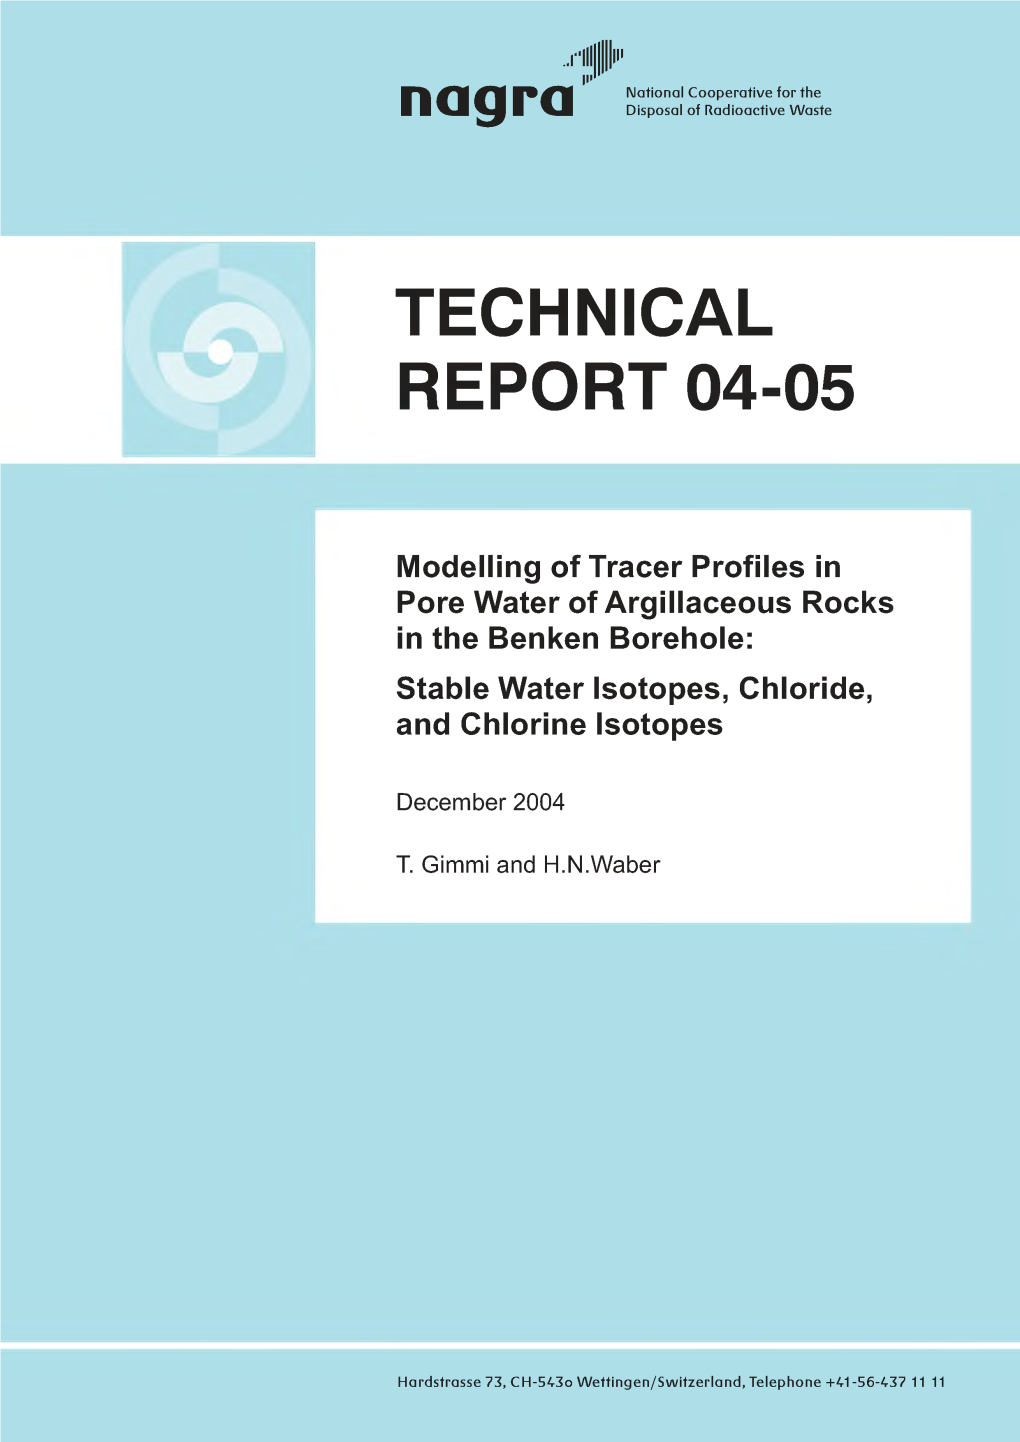 Modelling of Tracer Profiles in Pore Water of Argillaceous Rocks in the Benken Borehole: Stable Water Isotopes, Chloride, and Chlorine Isotopes